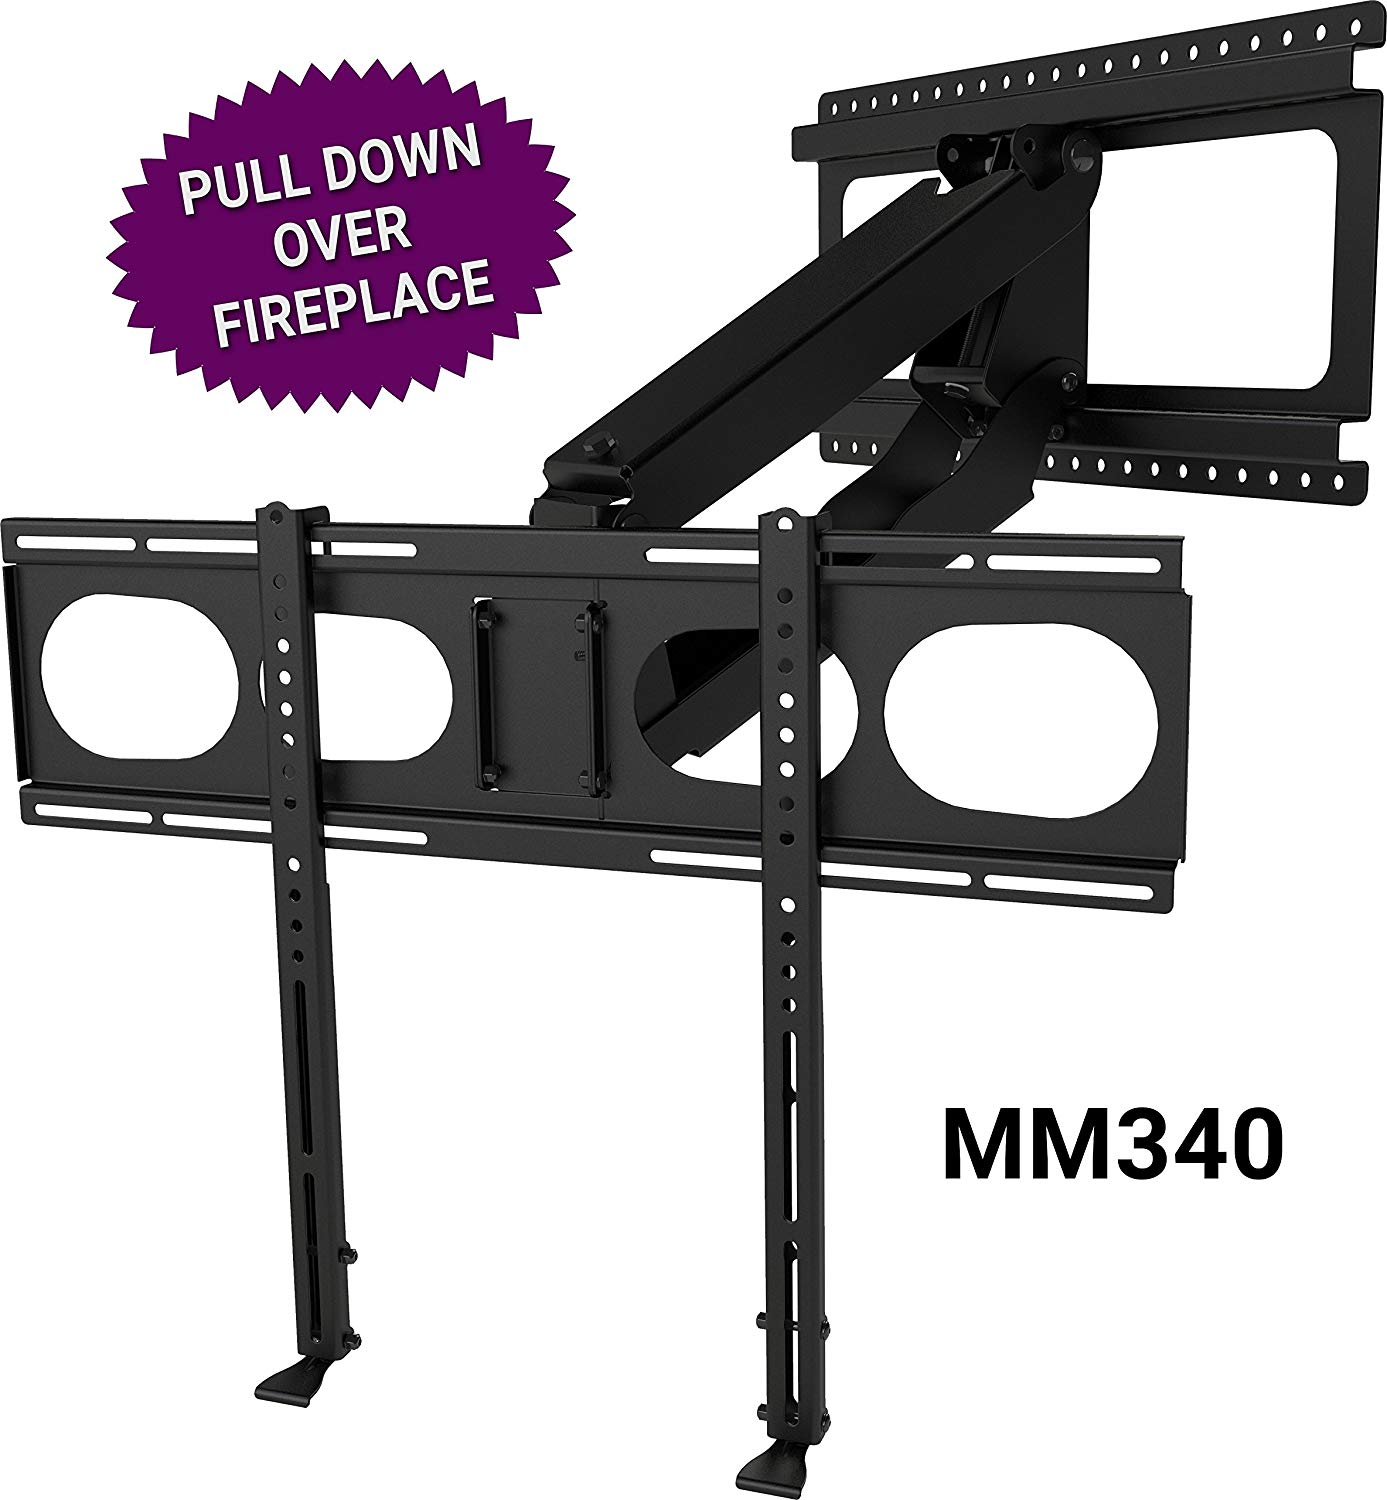 Tv Above Fireplace where to Put Cable Box Best Of Mantelmount Mm340 Fireplace Pull Down Tv Mount